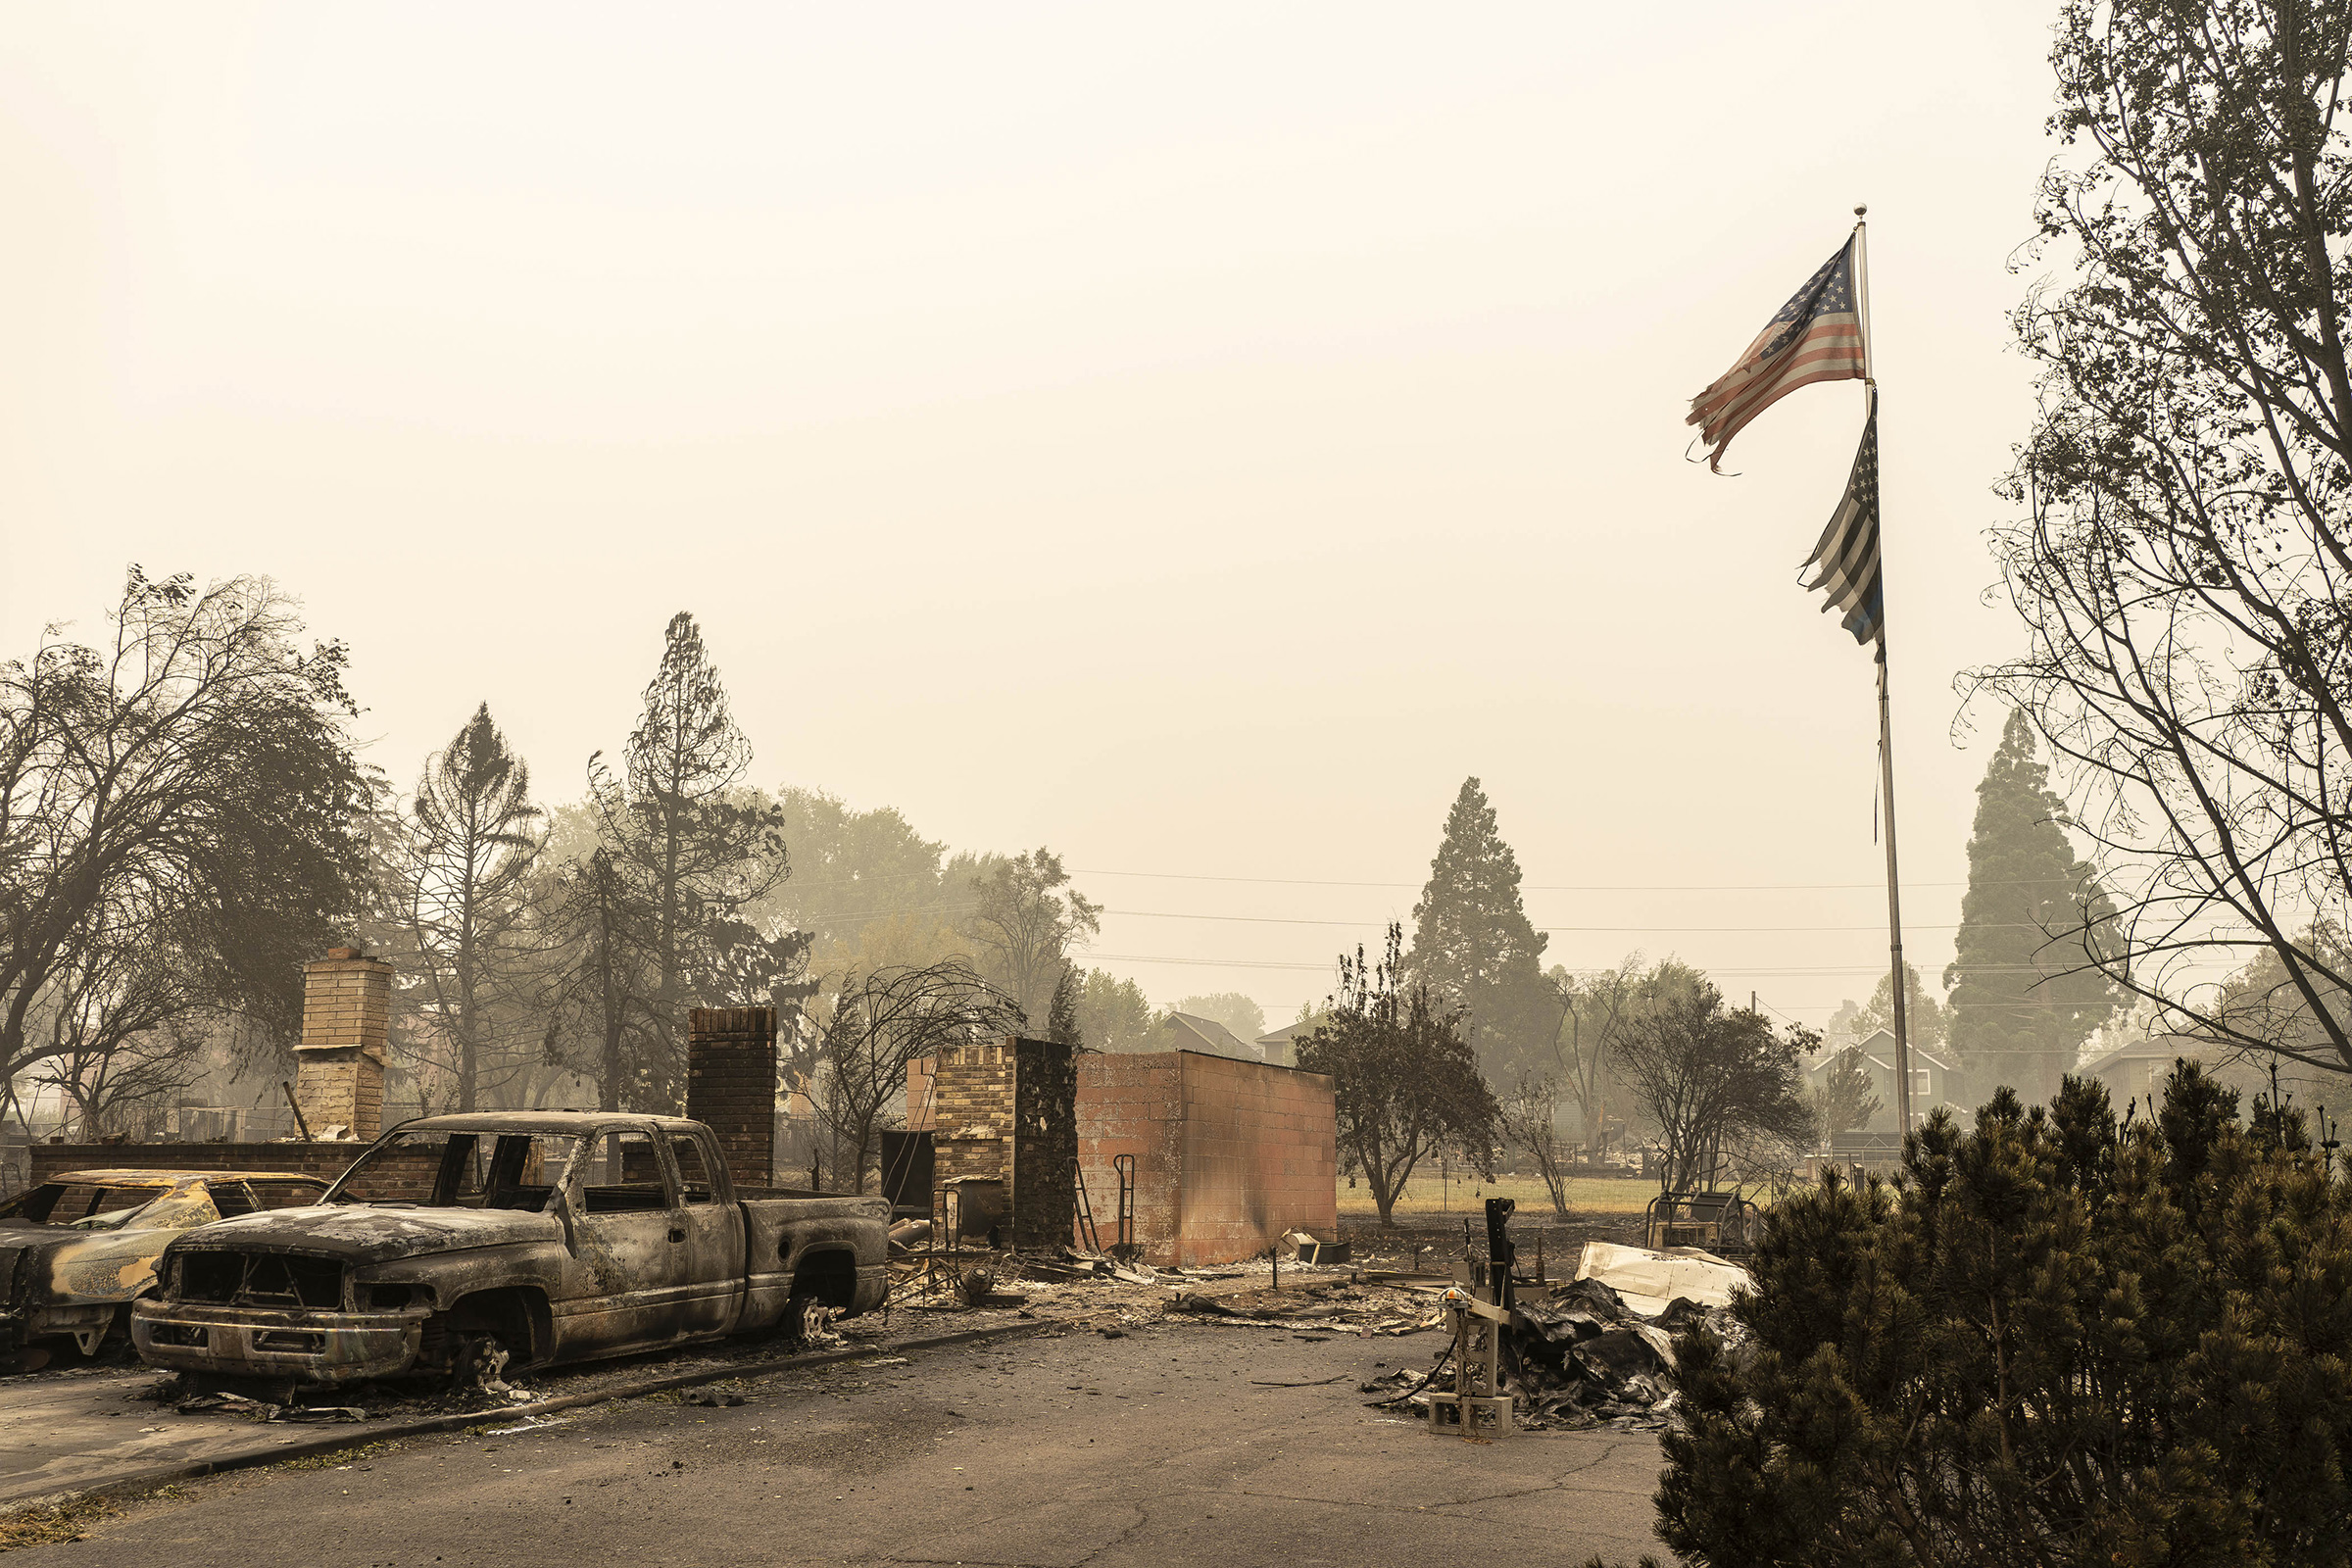 A U.S. flag flies at a burnt home in a neighborhood destroyed by wildfire on Sept. 13 in Talent, OR (David Ryder—Getty Images)